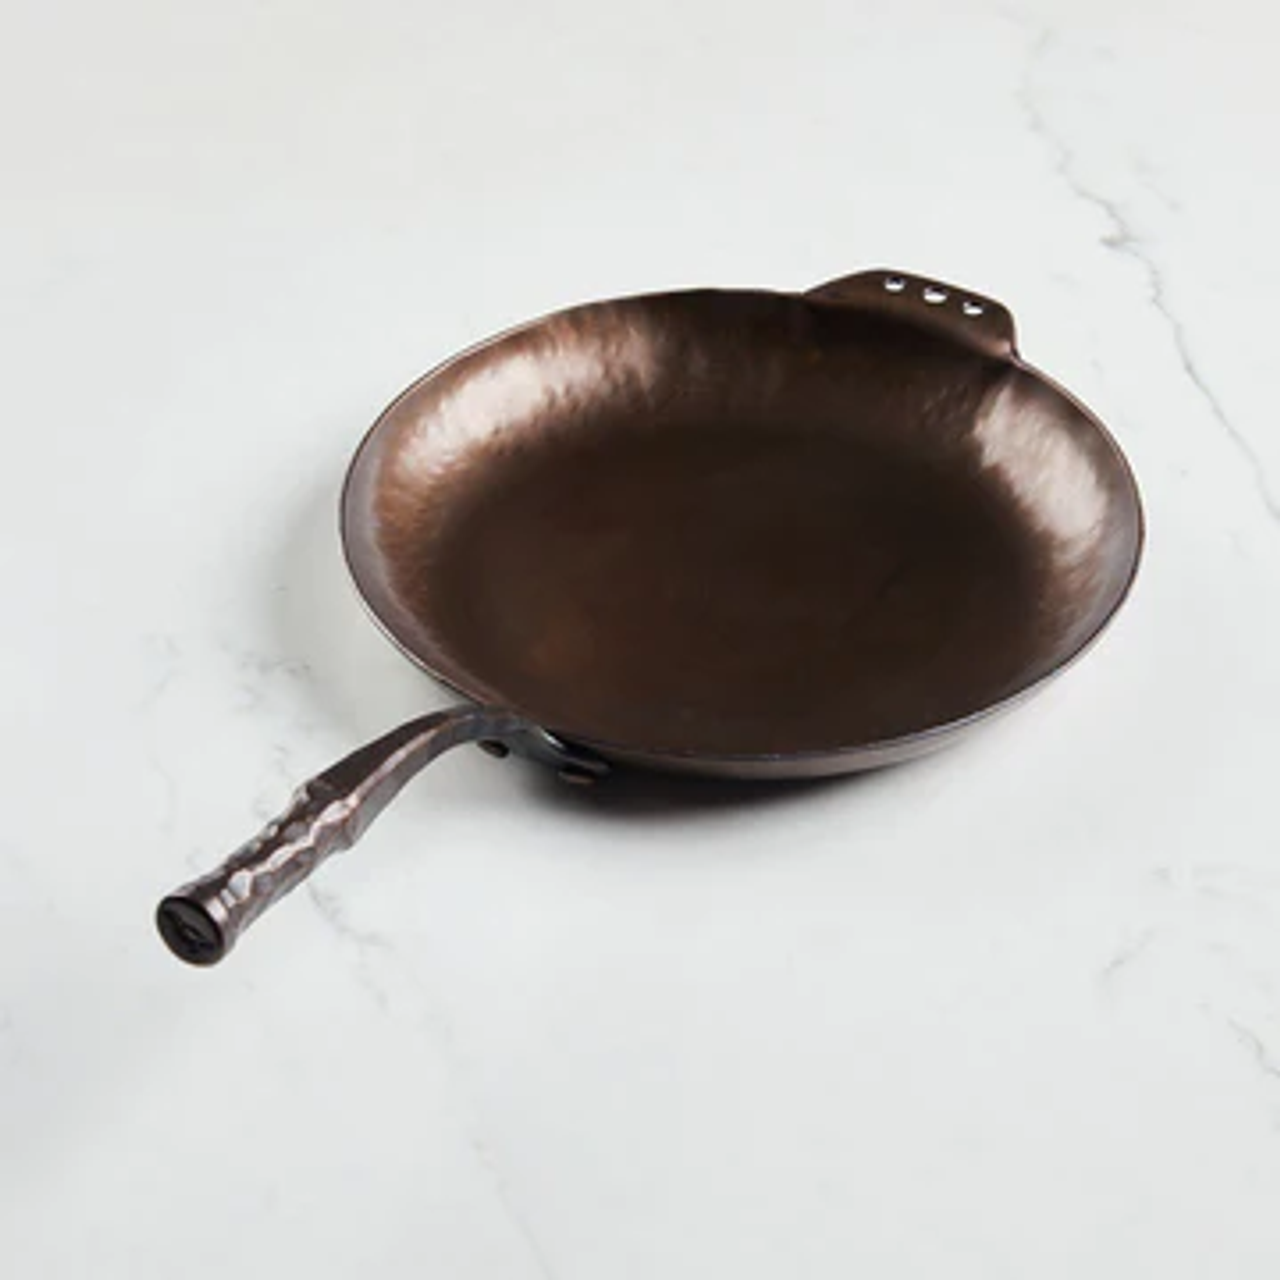 https://cdn11.bigcommerce.com/s-kk2jd0cxqh/images/stencil/1280x1280/products/16772/10471/smithey-carbon-steel-farmhouse-skillet__21479.1655587390.png?c=1